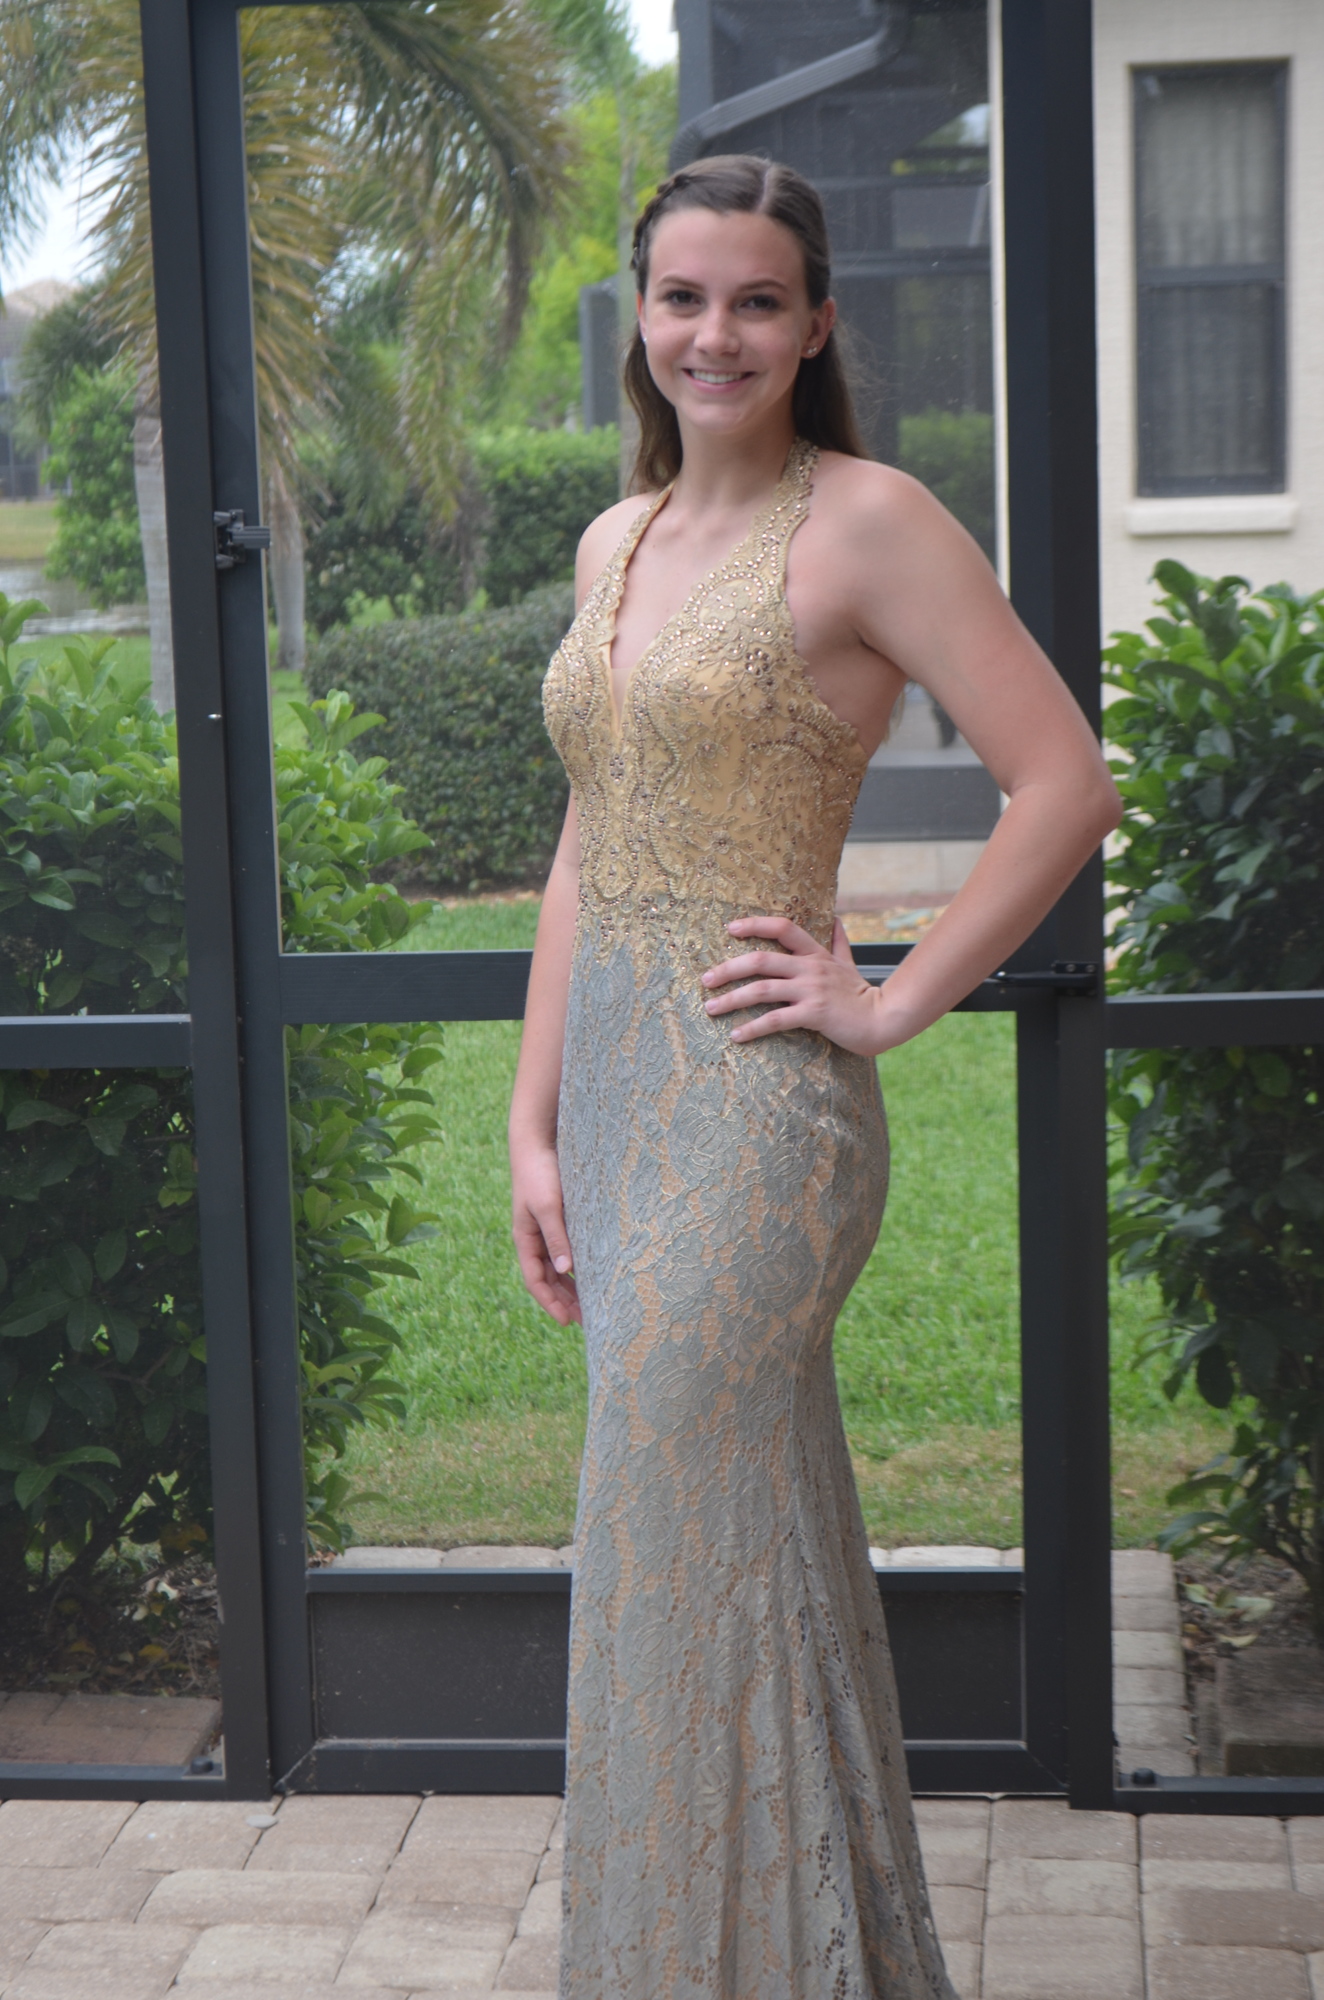 Emily Manning models the prom dress she's wearing to Lakewood Ranch's prom on April 13.